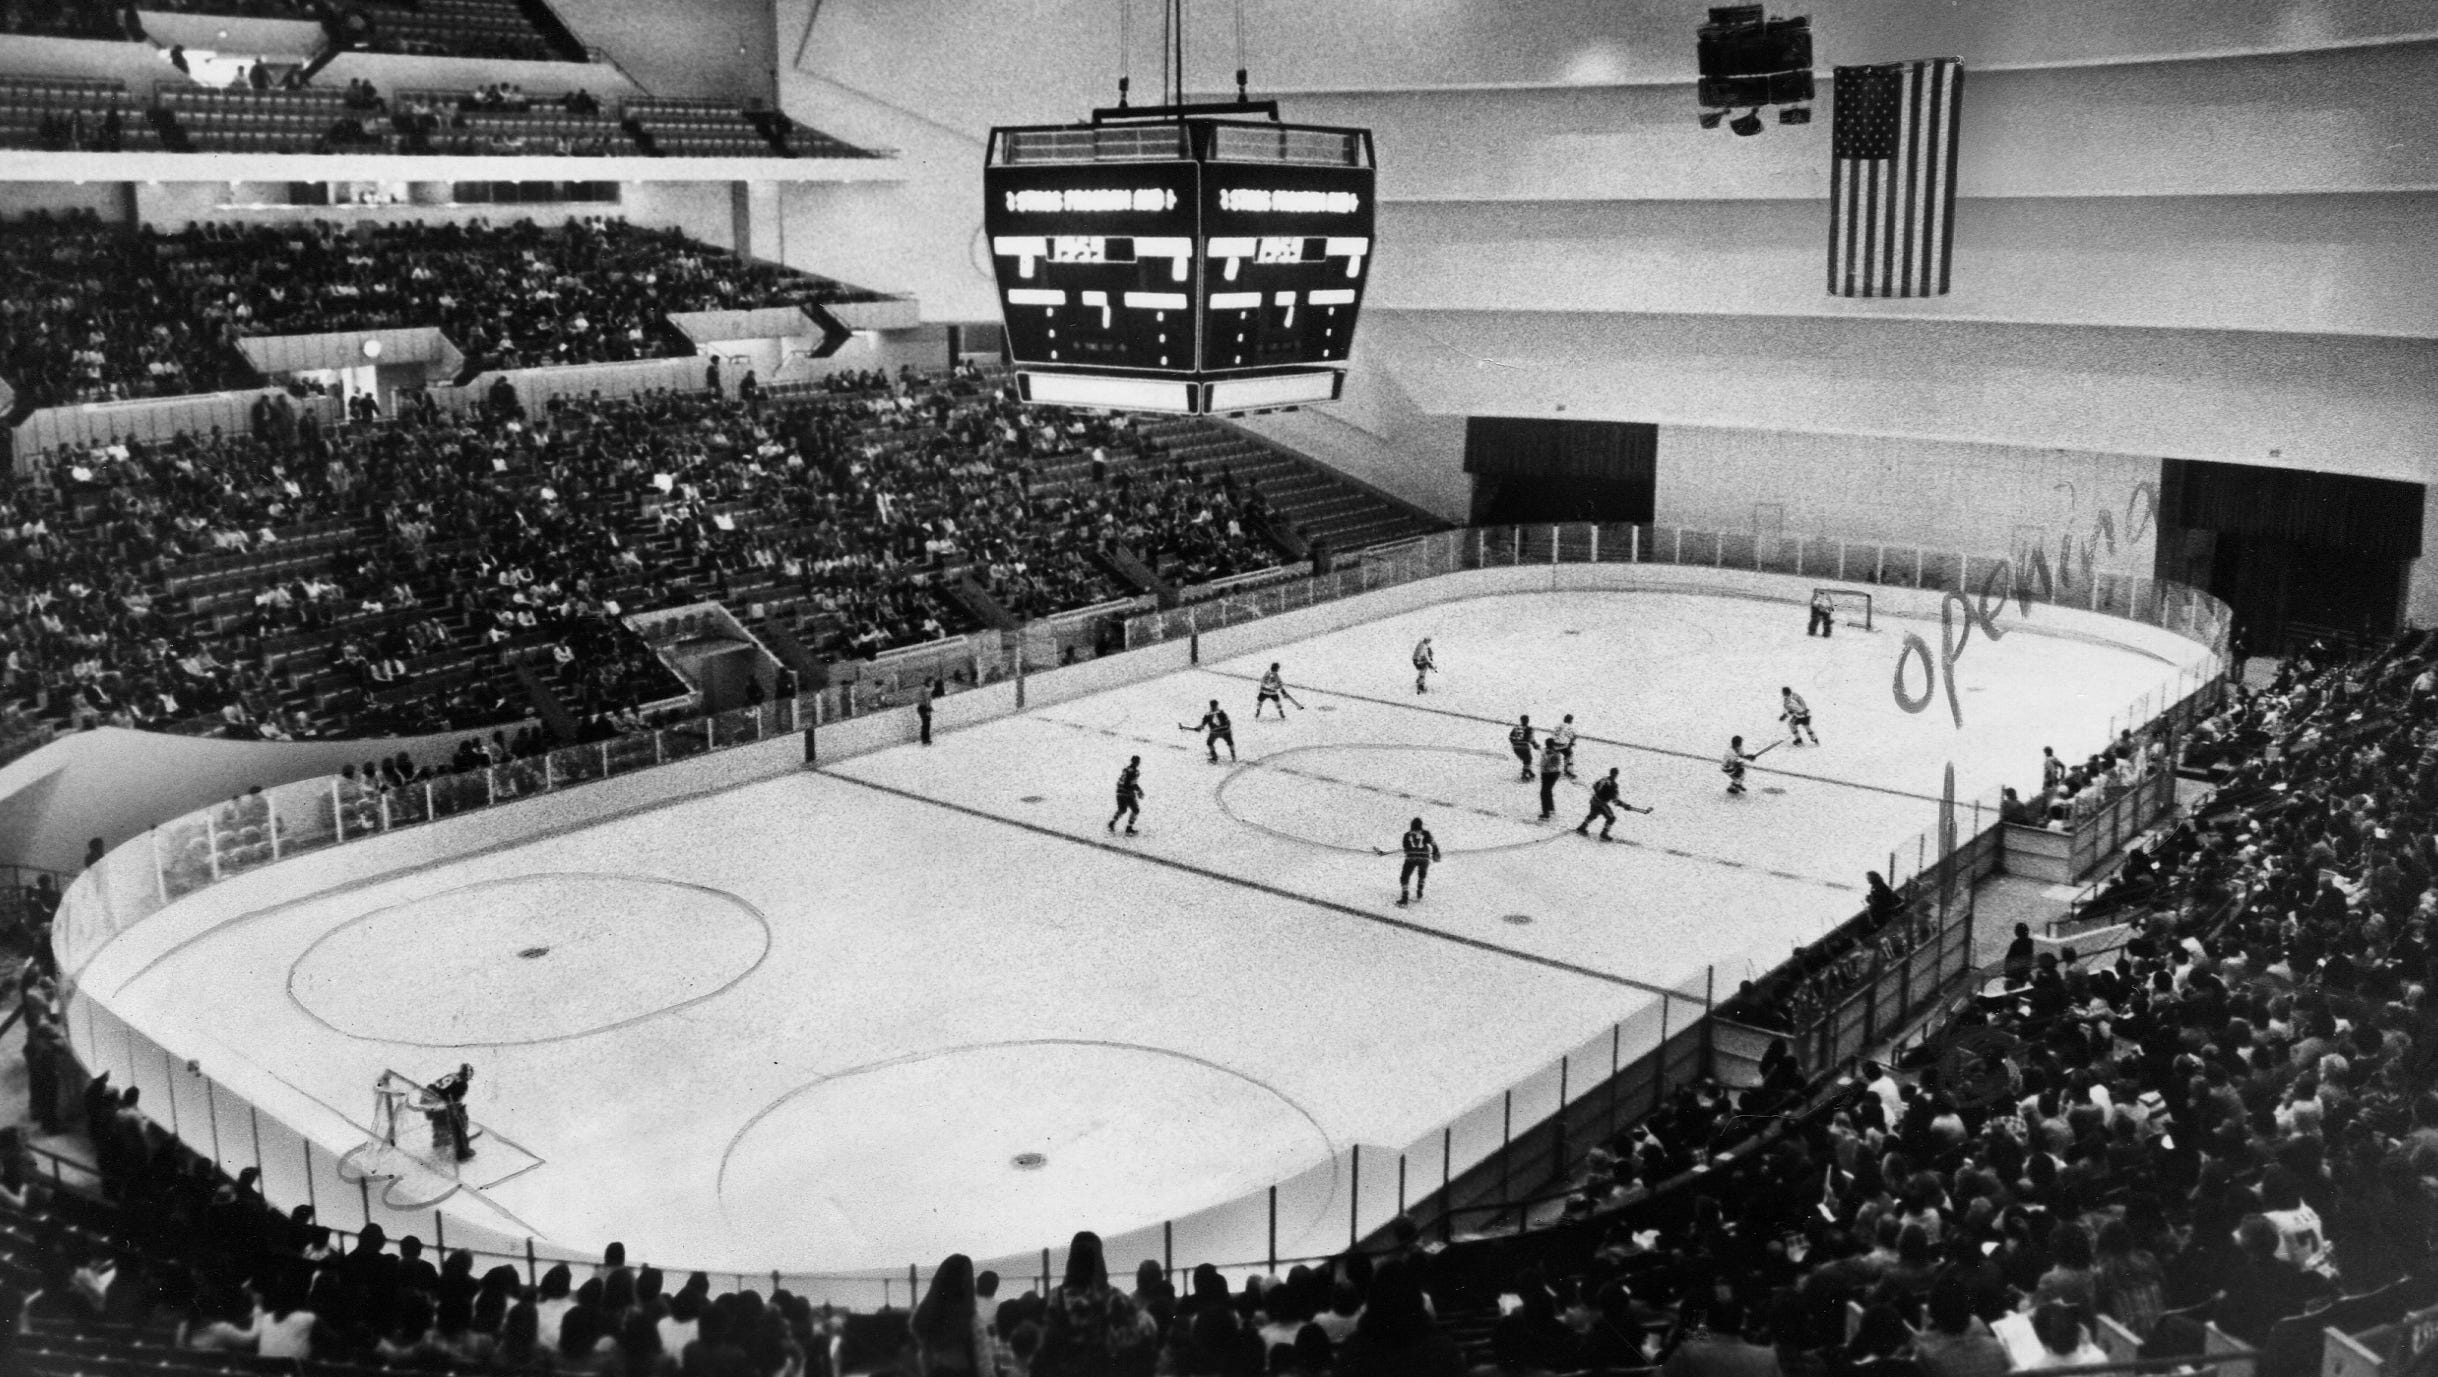 A hockey game is played in Cobo Arena on Oct. 12, 1974. The World Hockey Association Michigan Stags played at Cobo for the 1974-75 season. The arena also was home to the Detroit Pistons from 1961 to 1978.